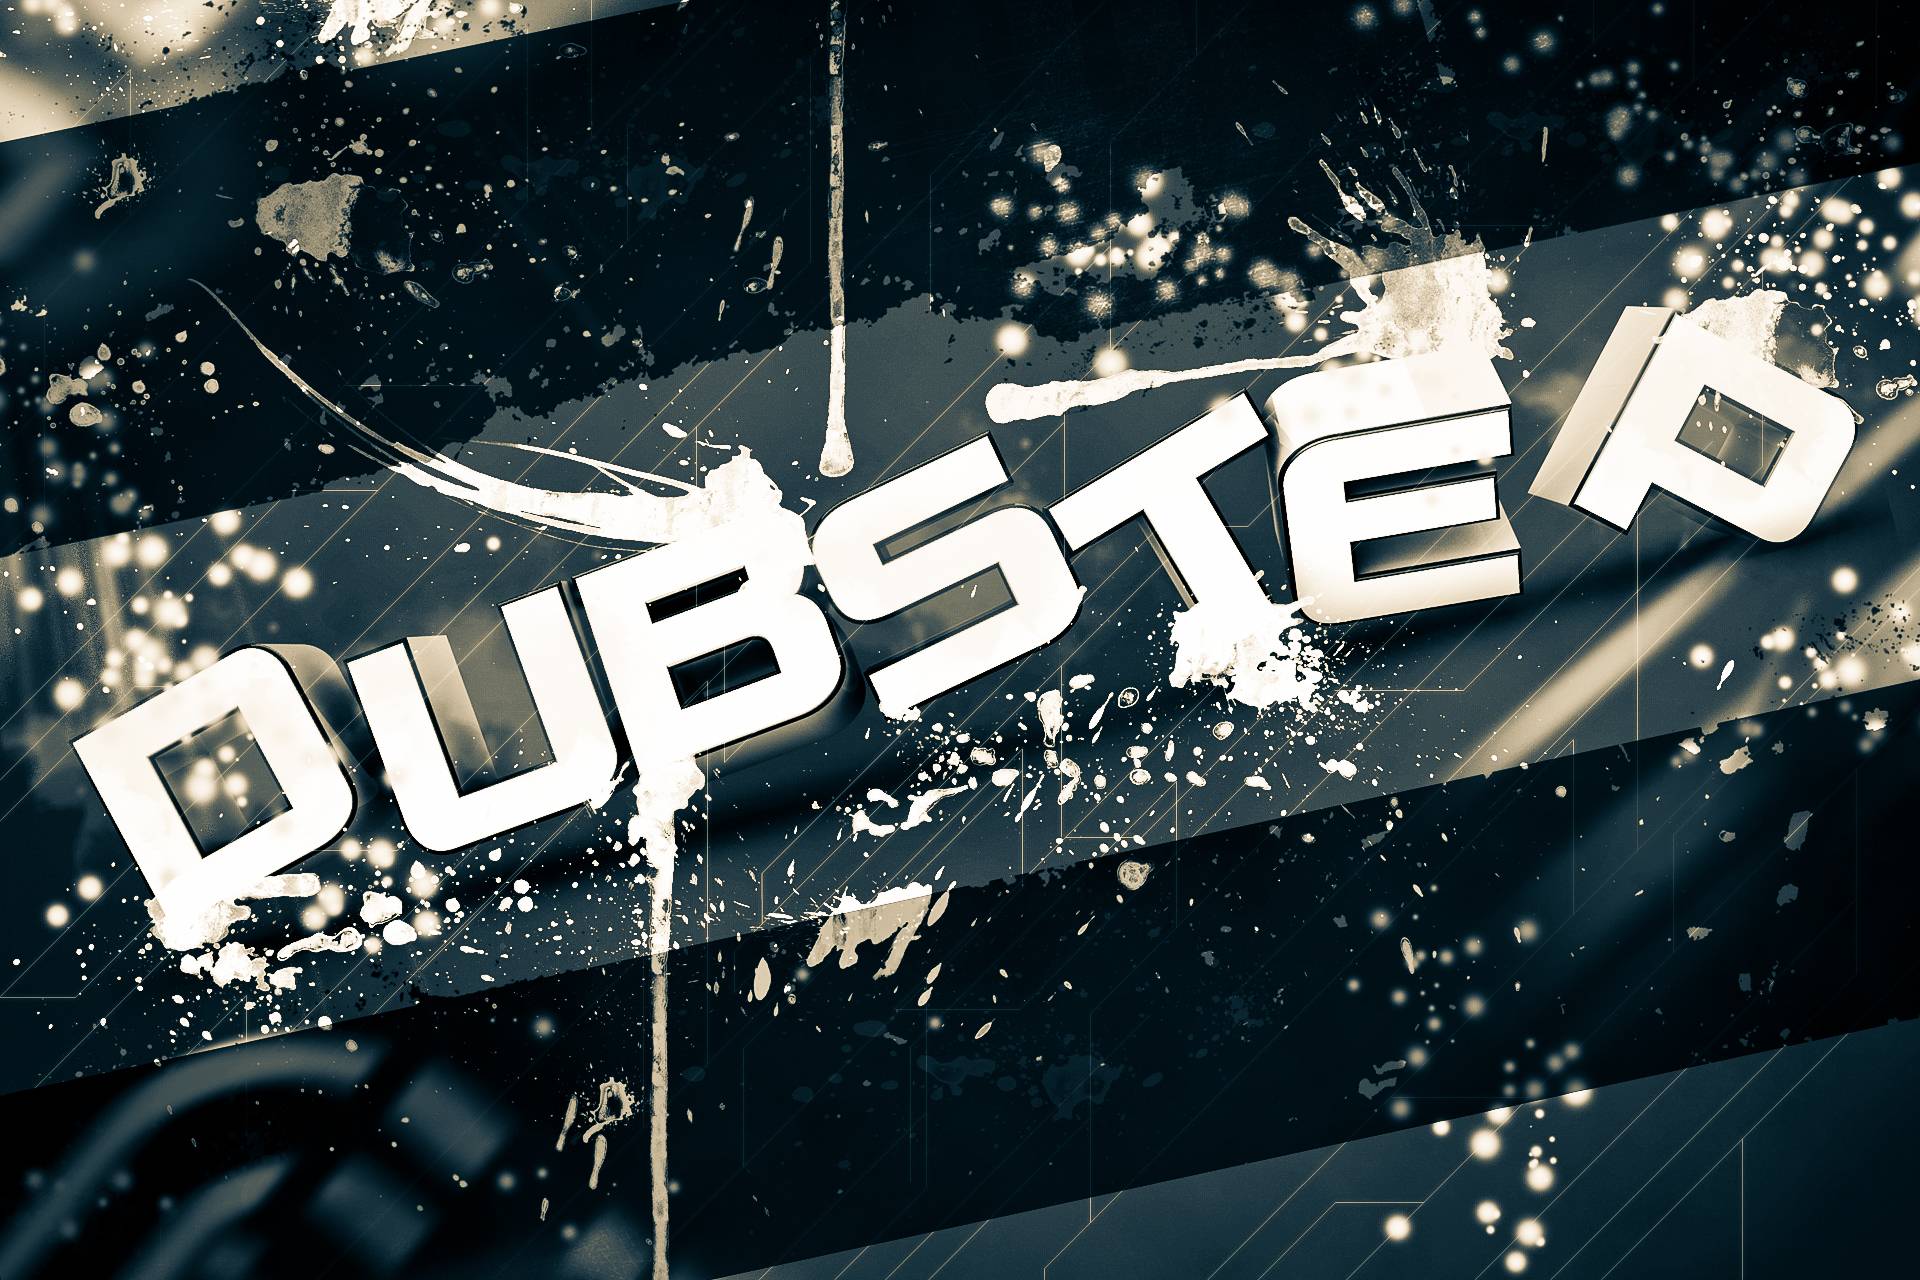 Abstract Dubstep Wallpaper Dubstep Wallpaper White. High Quality